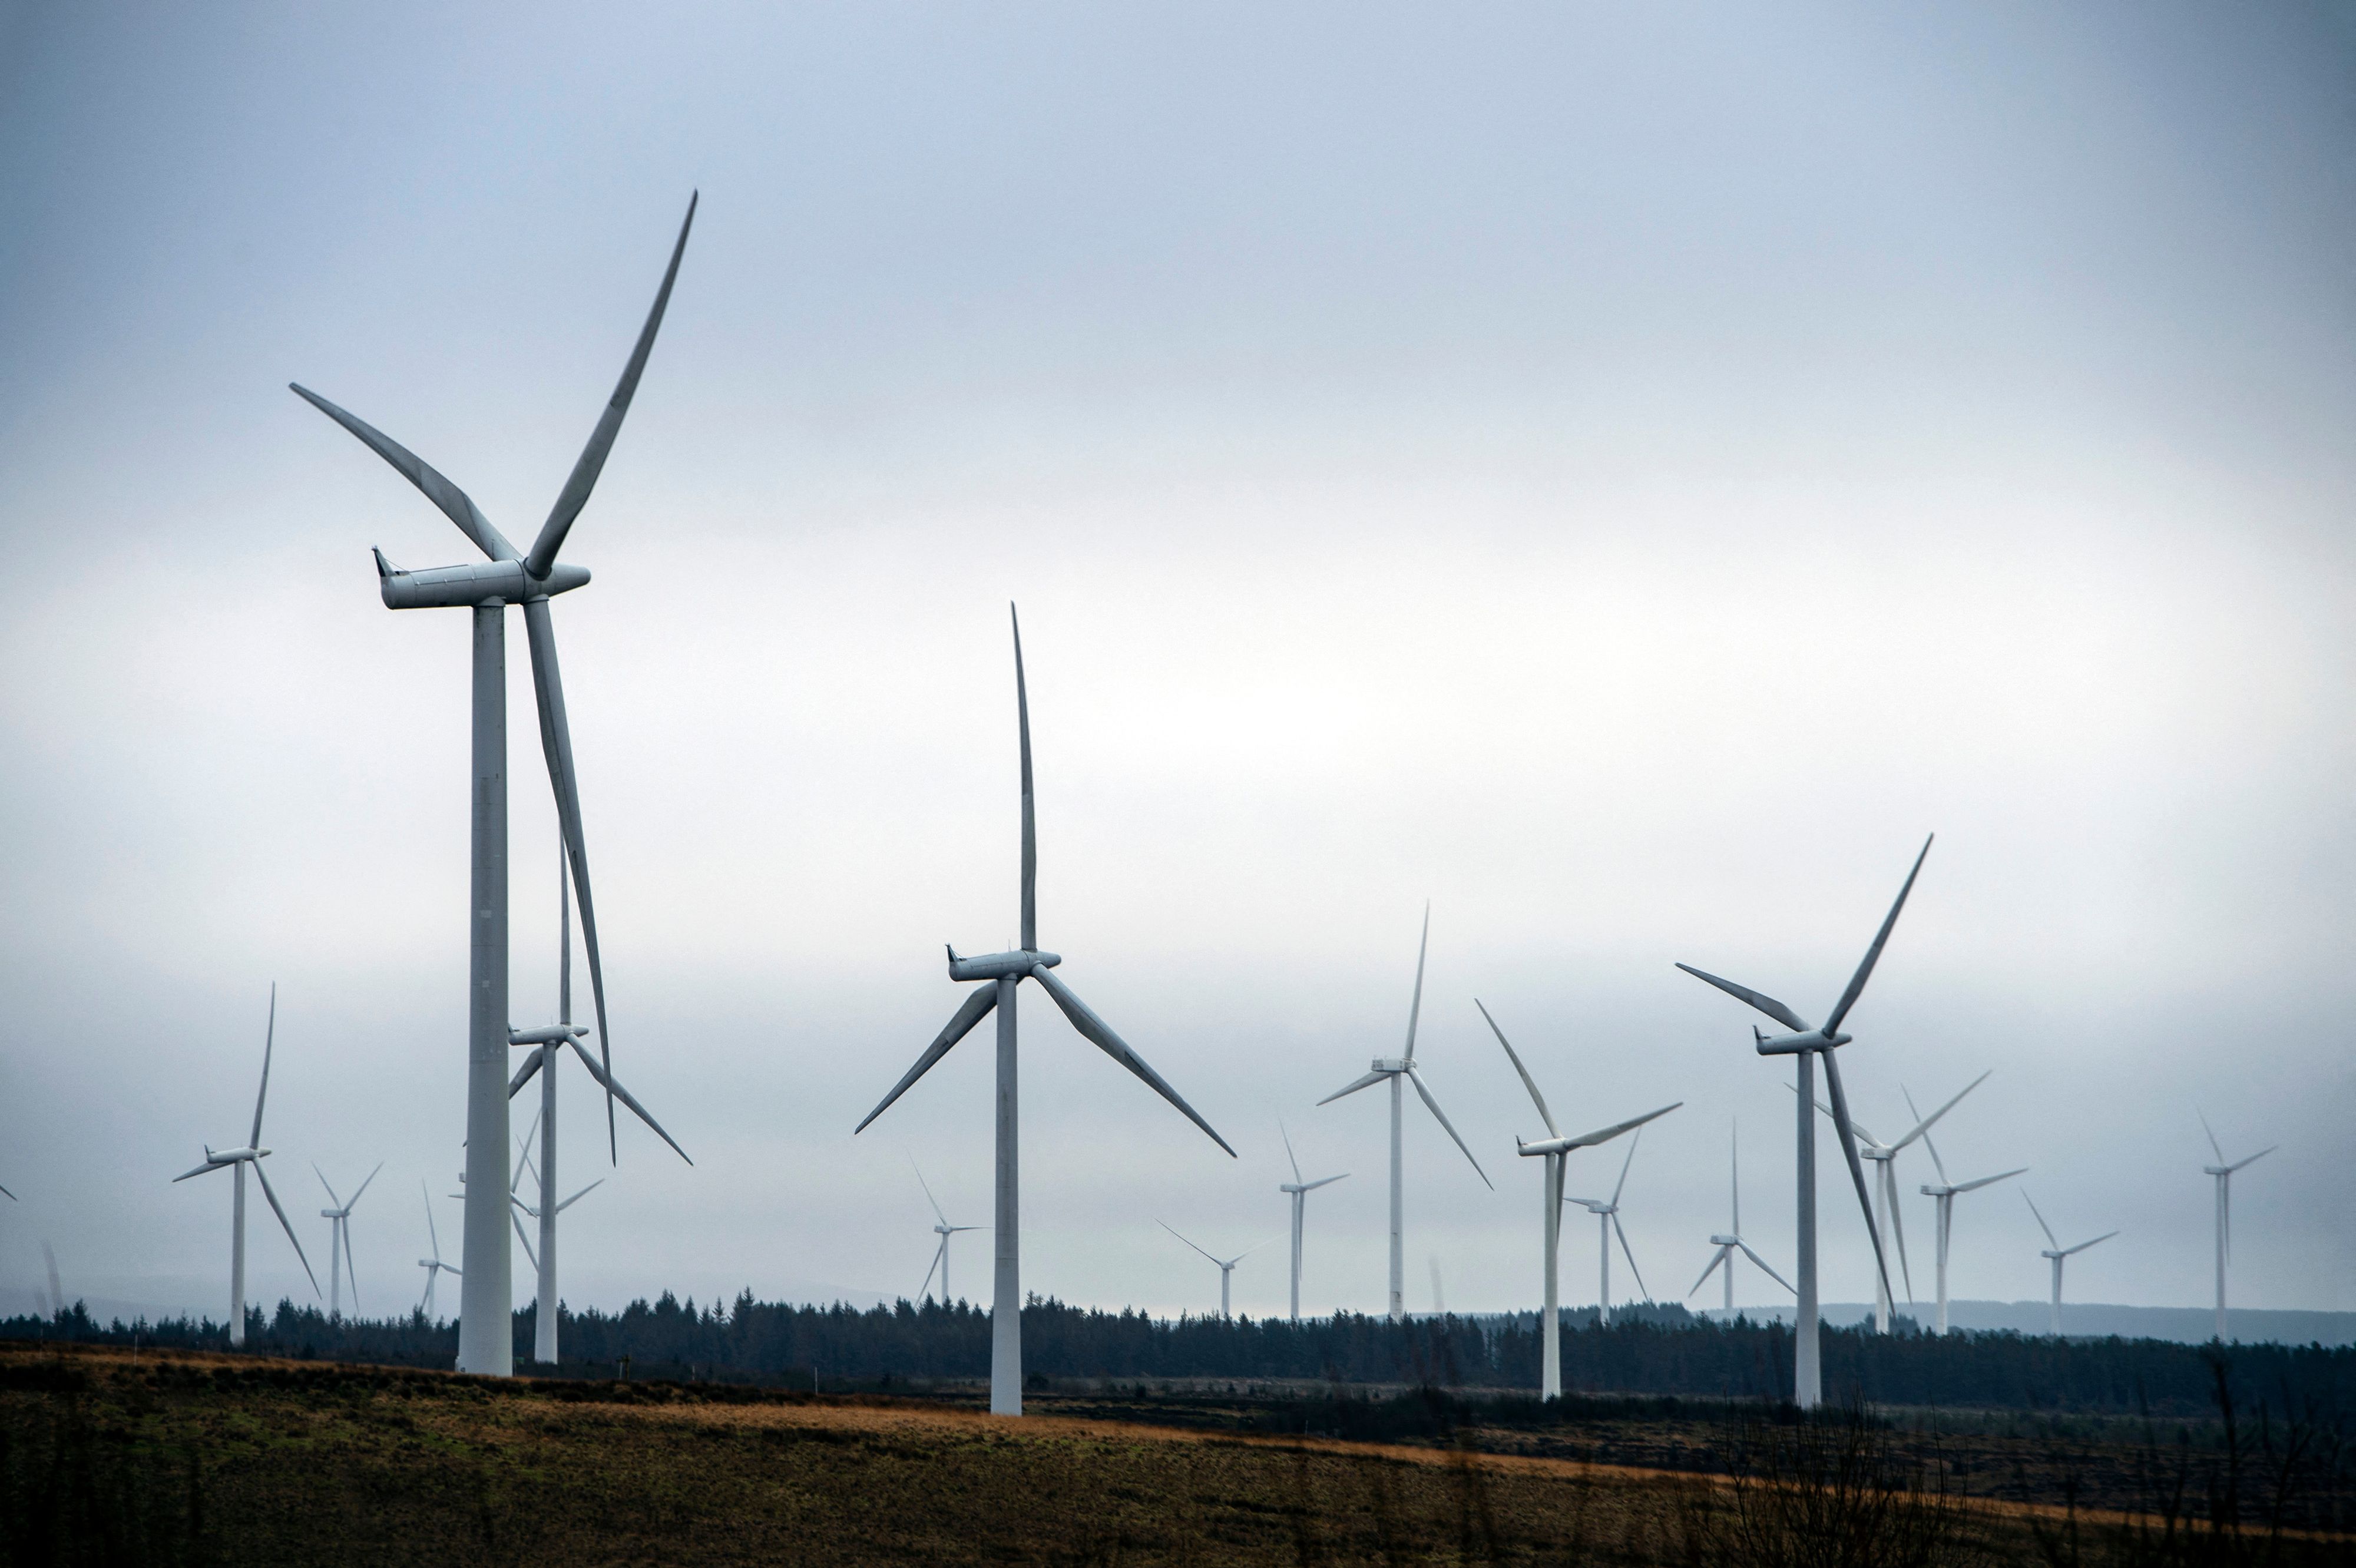 UK Ends Ban on New Onshore Wind Farms by Relaxing Planning Rules - Bloomberg